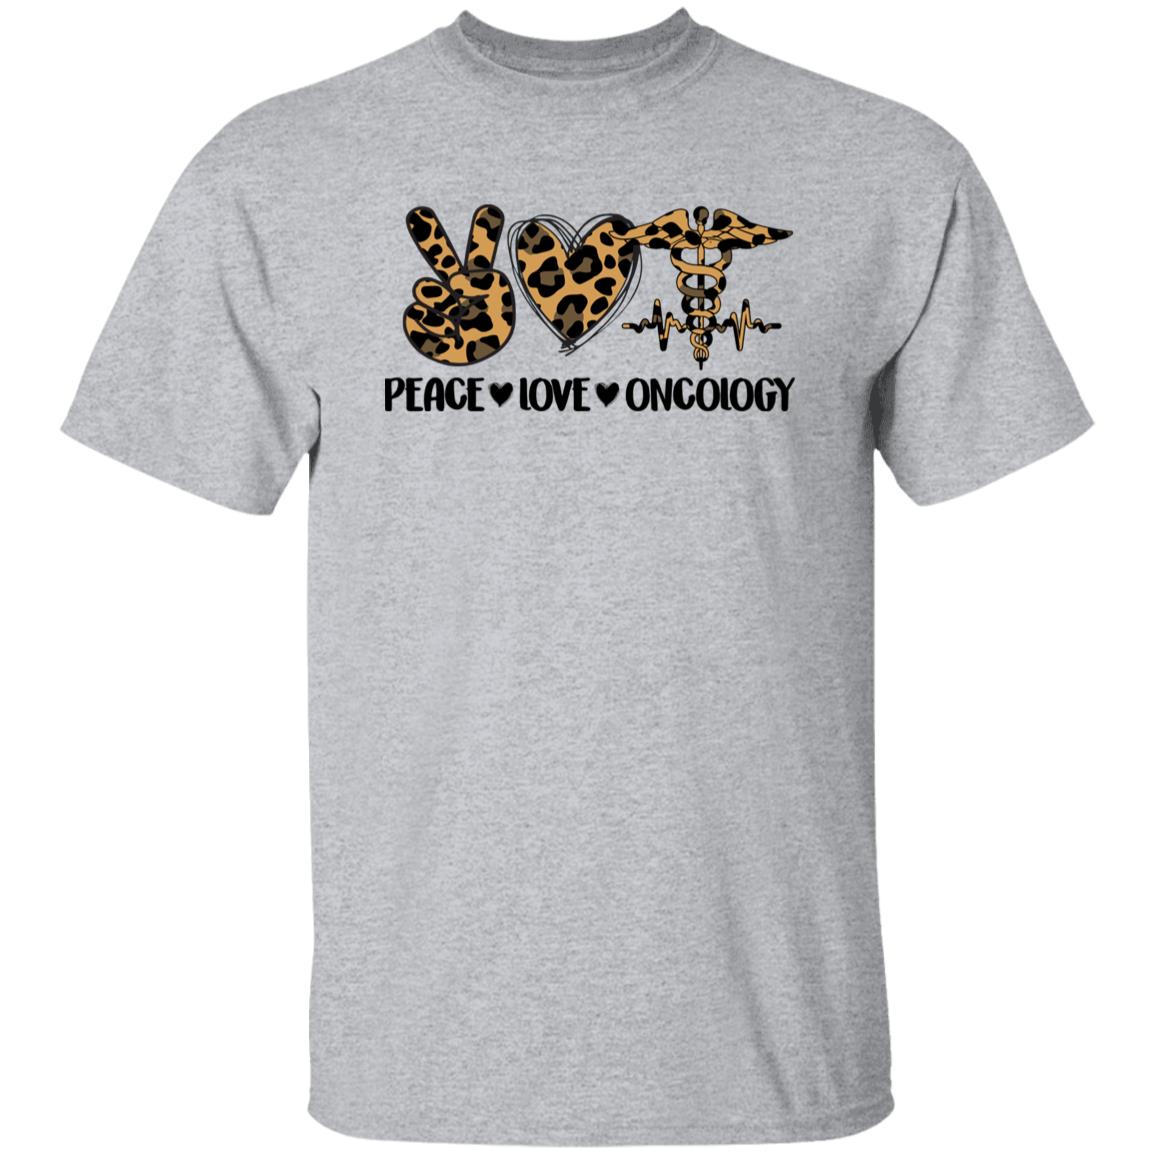 Peace Love Oncology T-Shirt Leopard skin Oncologist chemo nuse Unisex Tee Sand White Sport Grey-Family-Gift-Planet